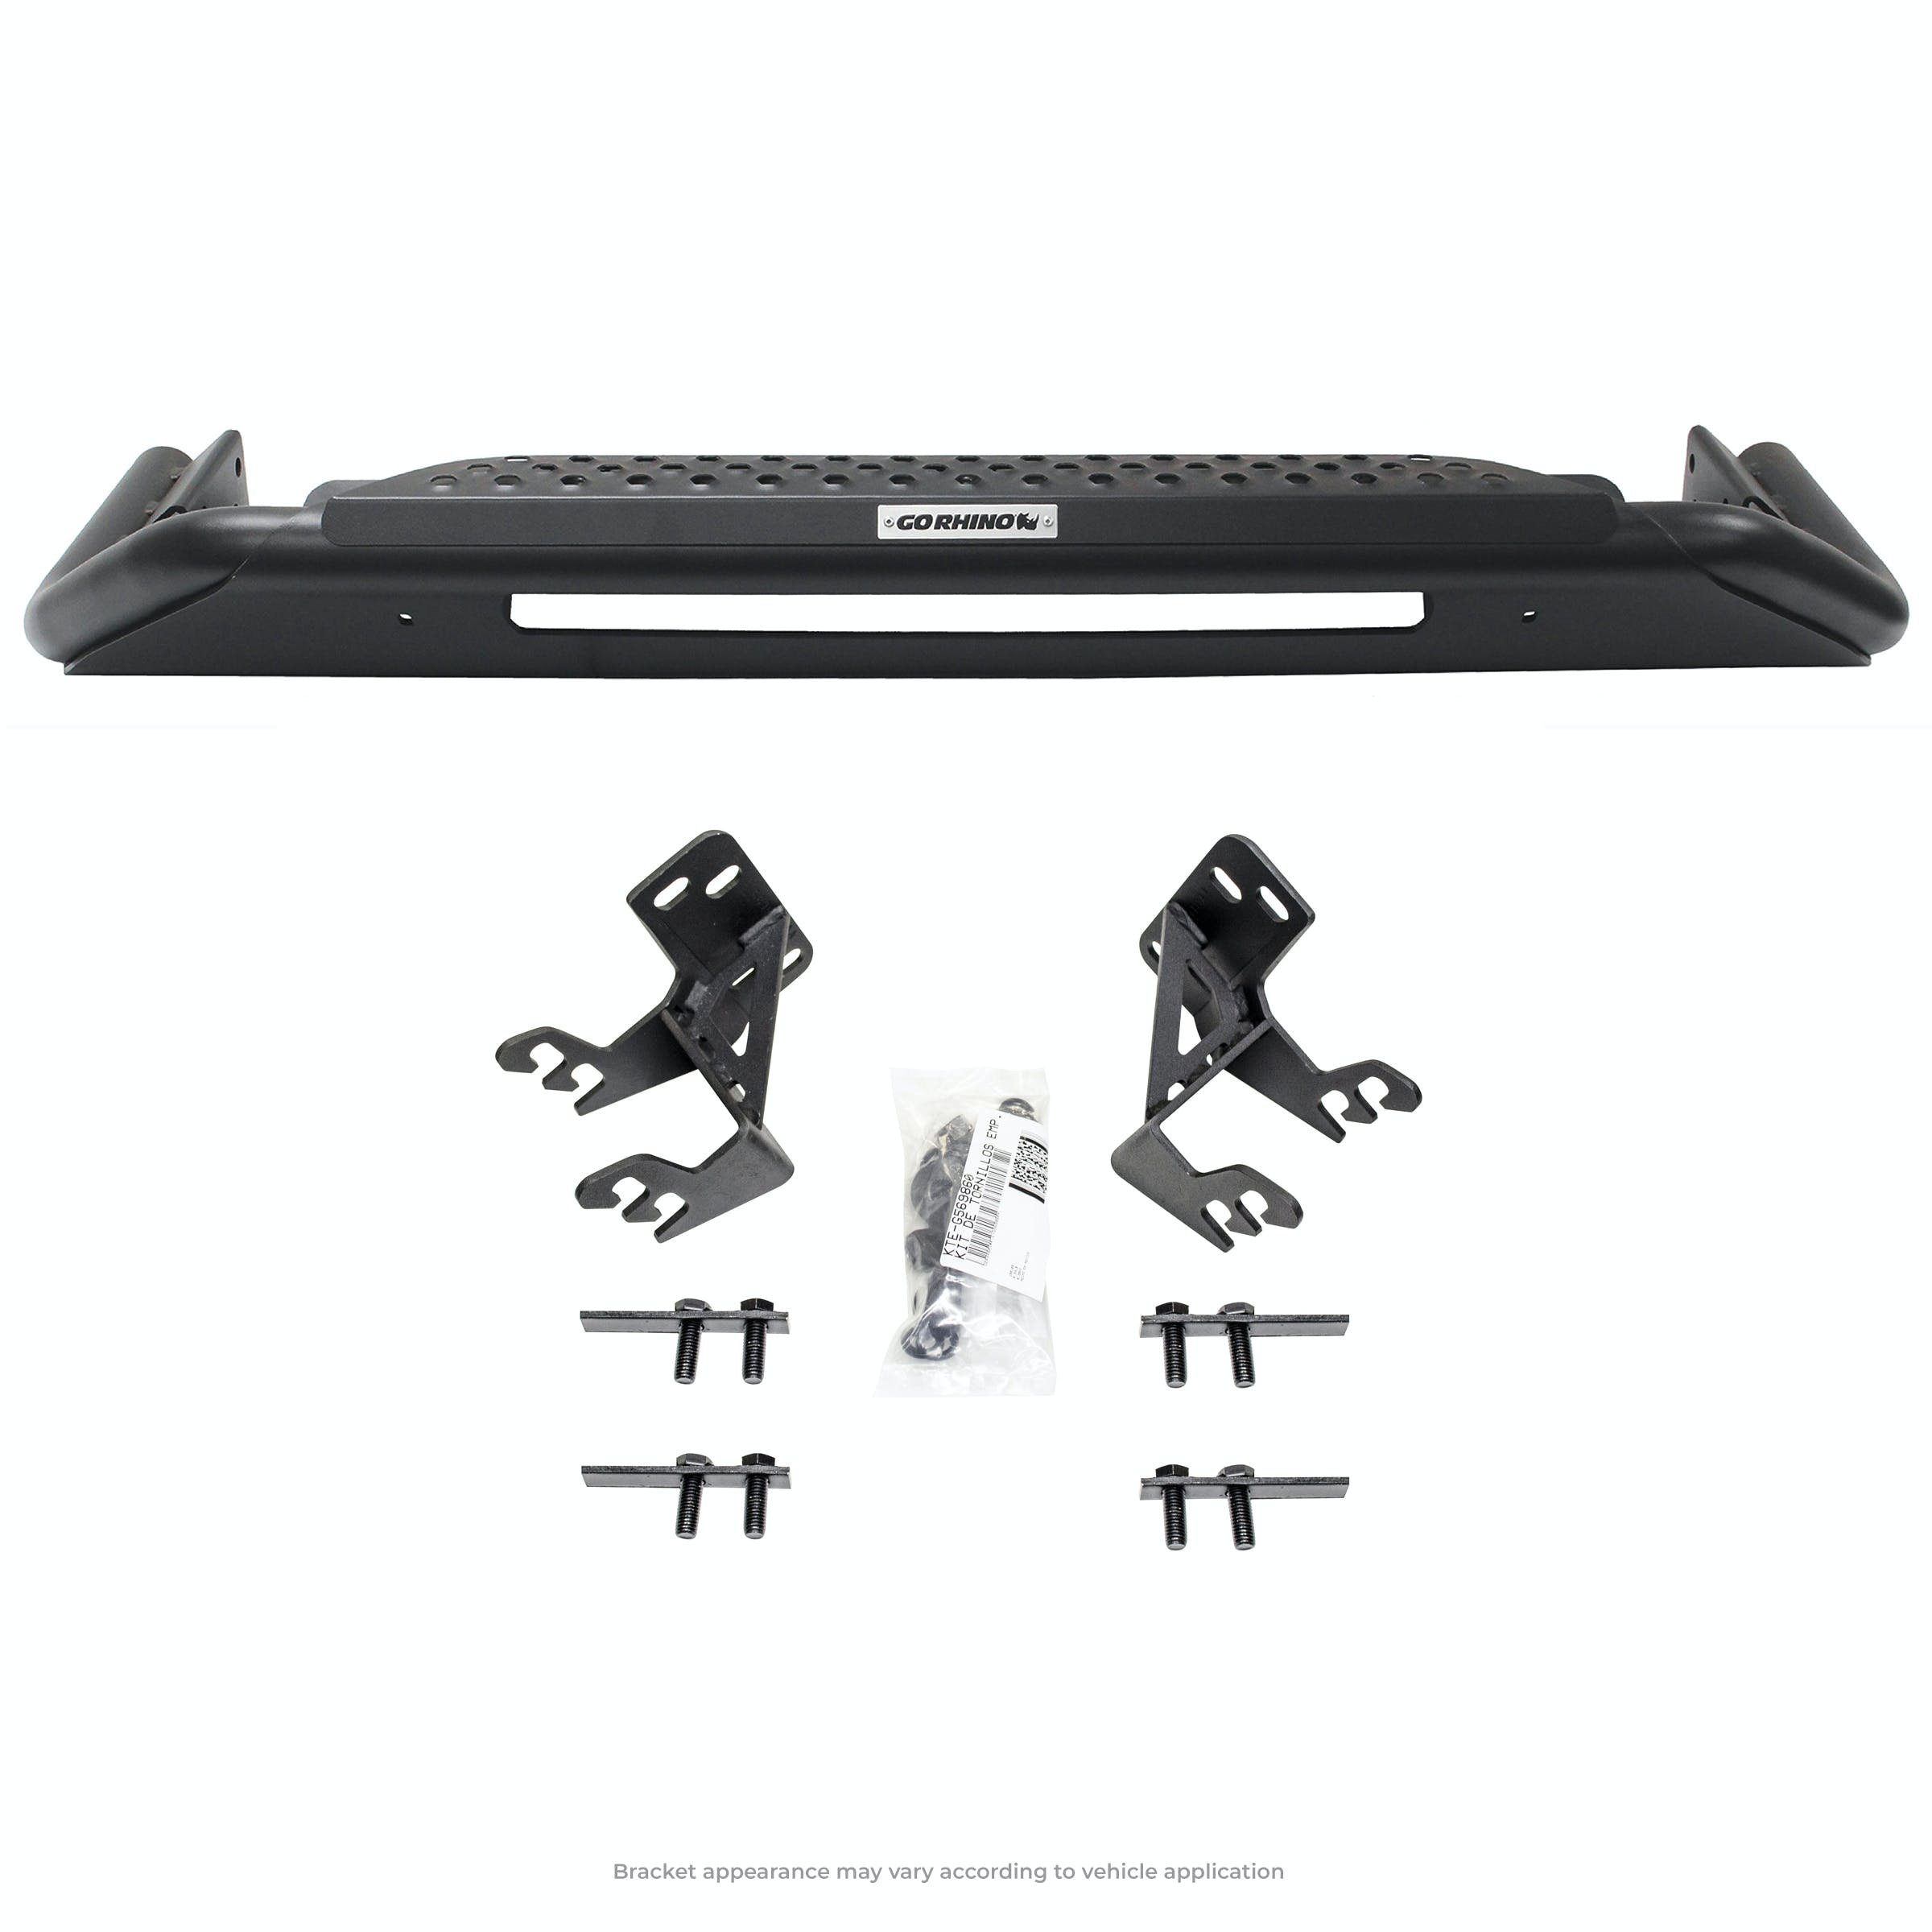 Go Rhino 569860T RC3 LR - Complete kit: Front guard + Brackets